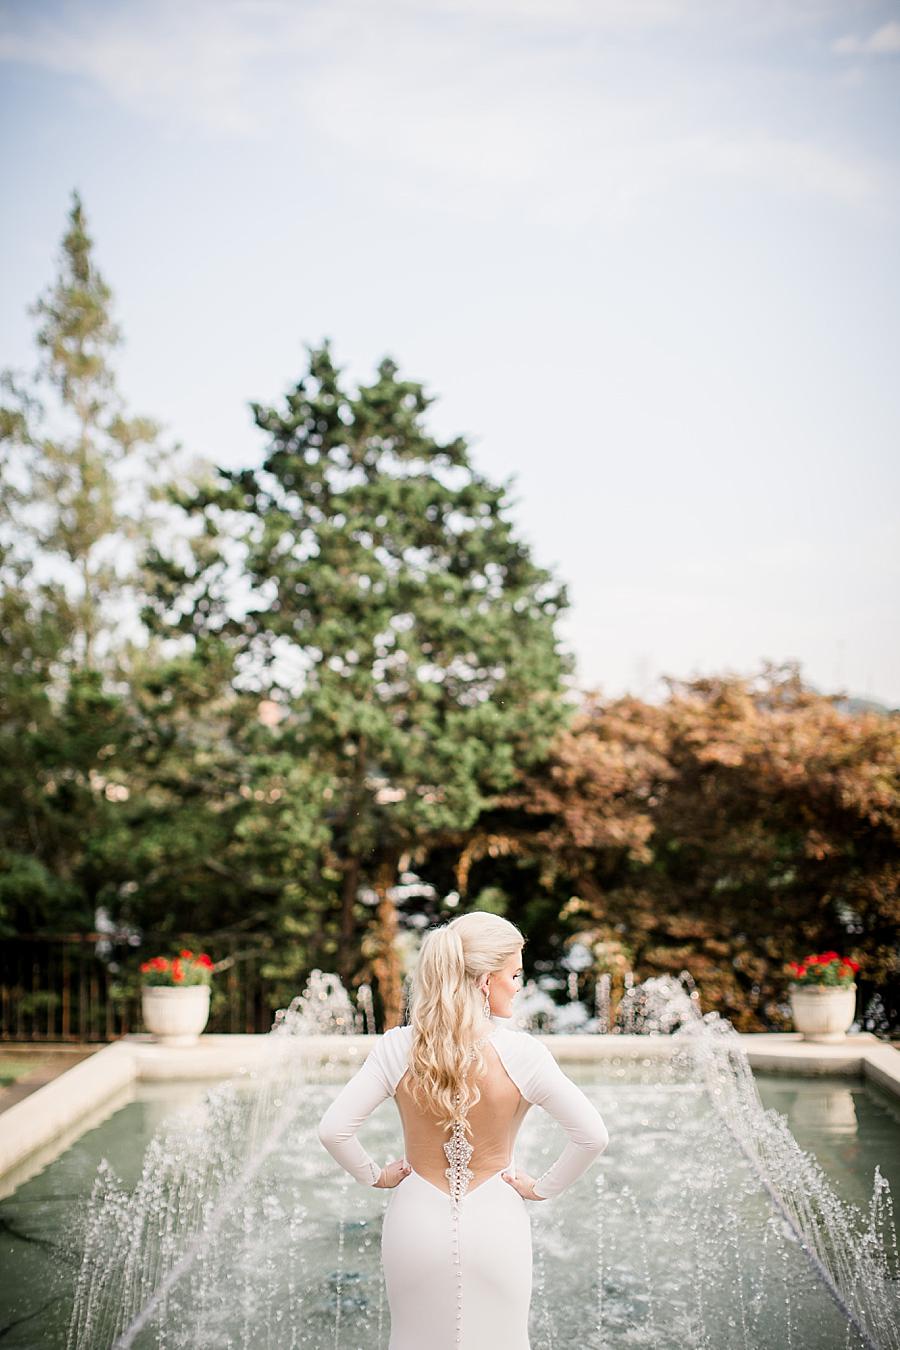 Hands on hips at this Crescent Bend Bridal Session by Knoxville Wedding Photographer, Amanda May Photos.